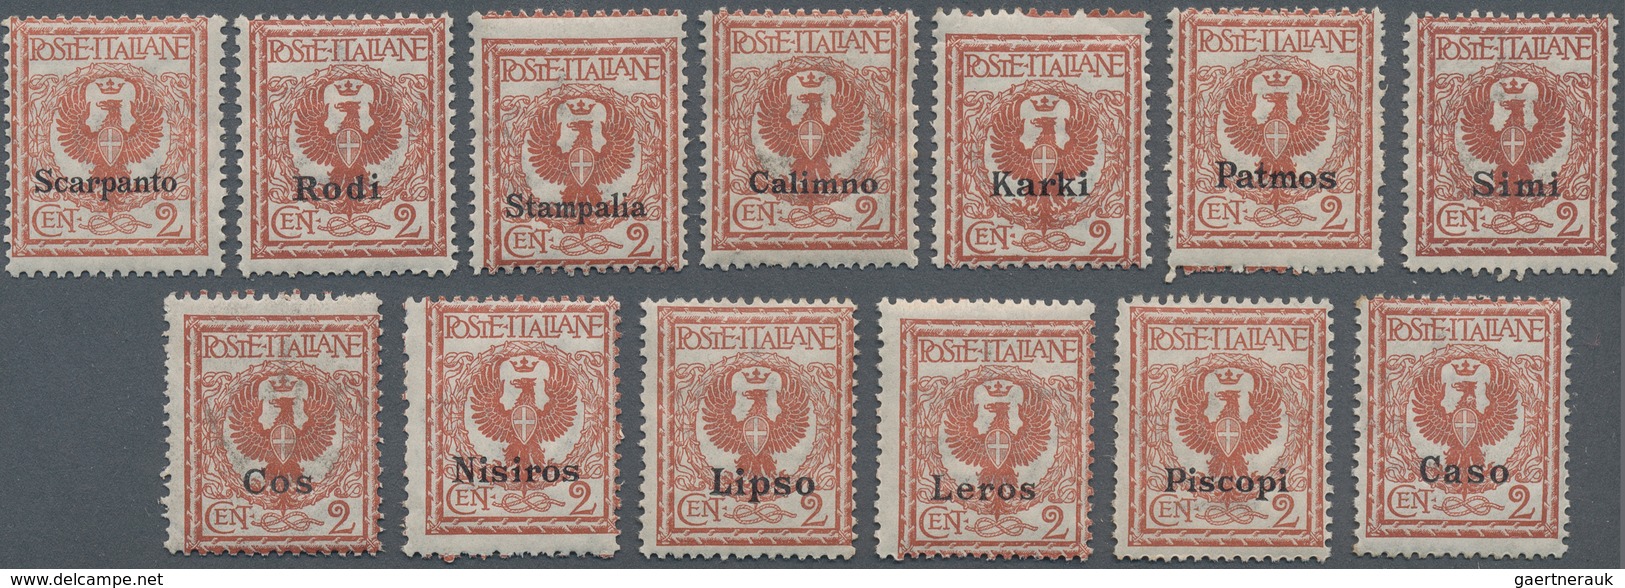 Ägäische Inseln: 1912 Accumulation Of About 950 Single Stamps 2c. Orange-brown, Consists Of 73 Stamp - Egée